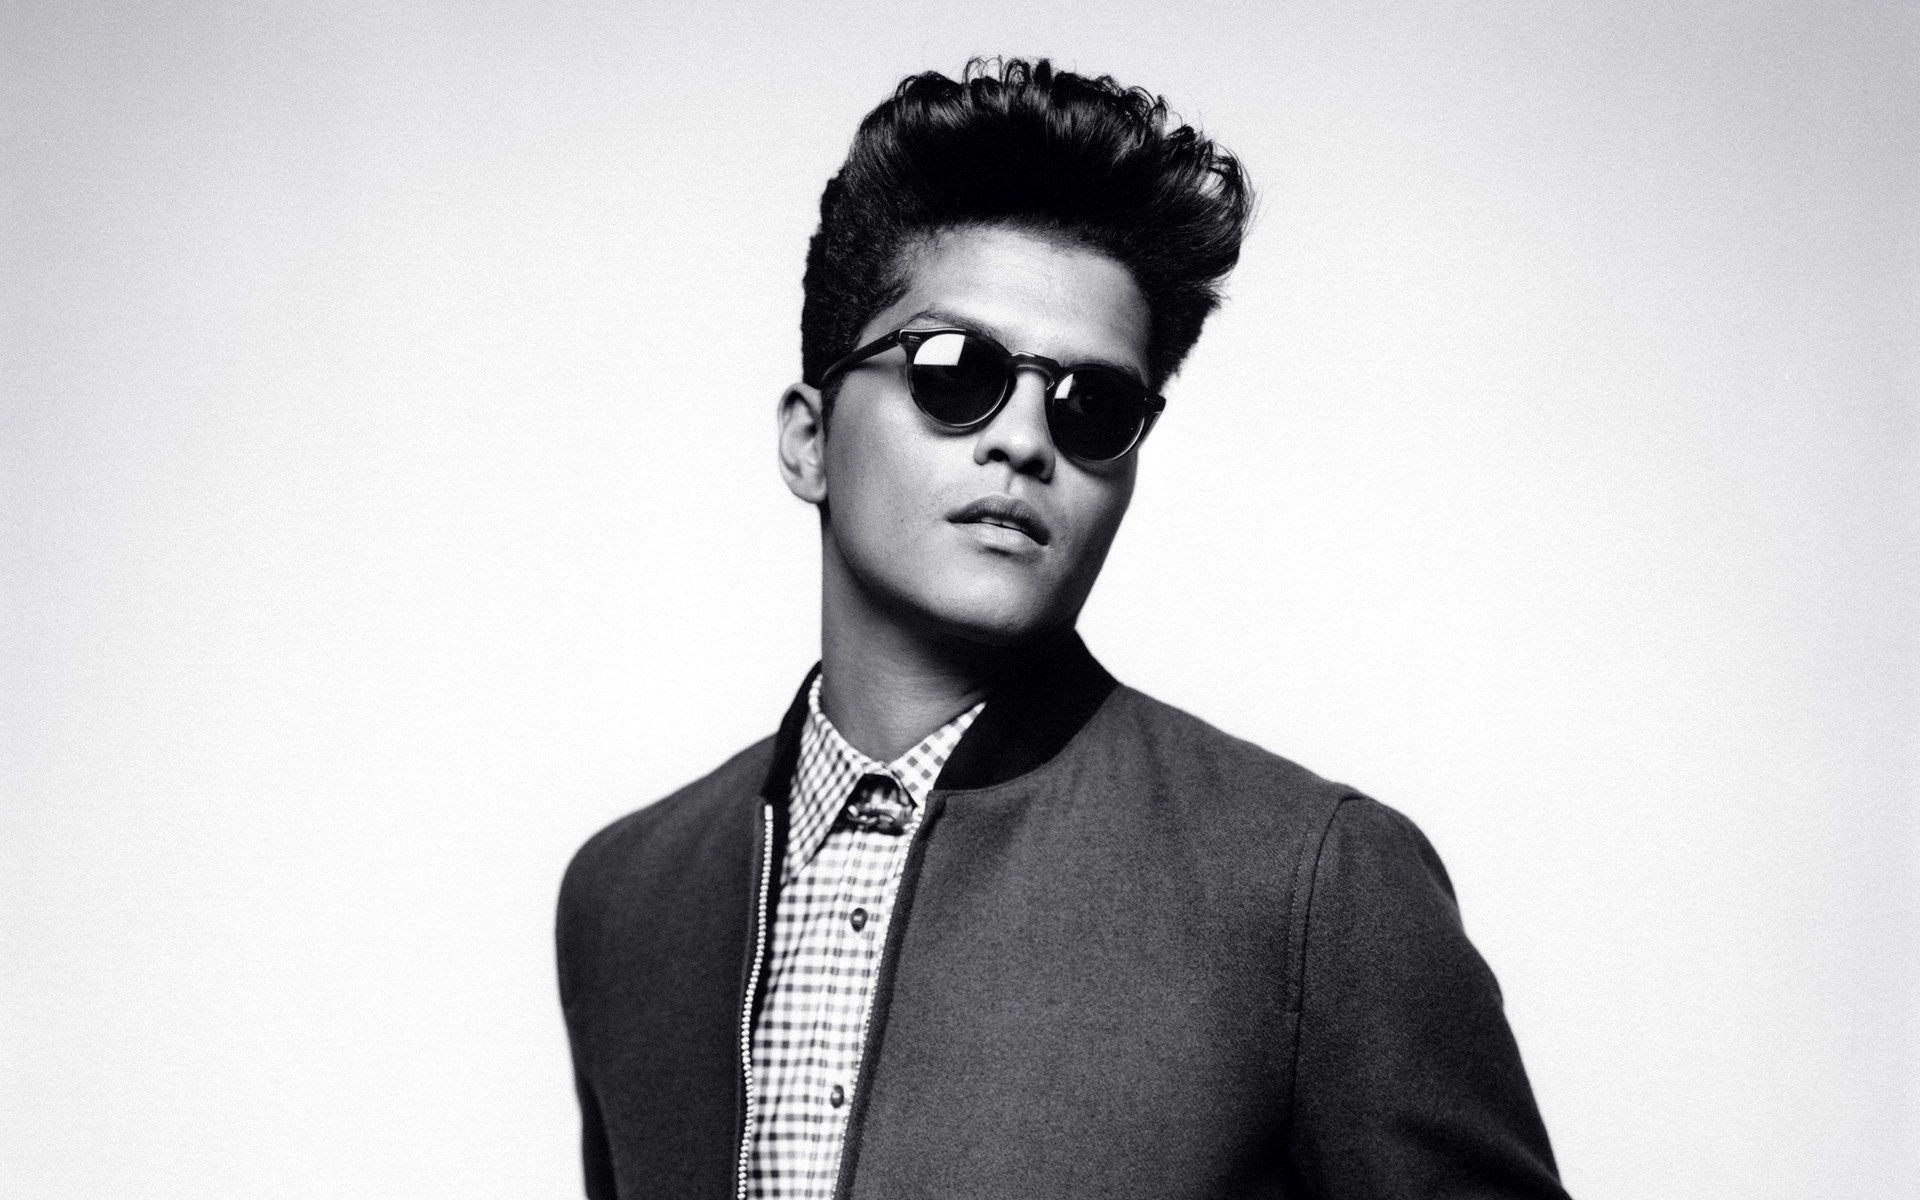 Bruno Mars 2017 Wallpapers Top Free Bruno Mars 2017 Backgrounds Wallpaperaccess